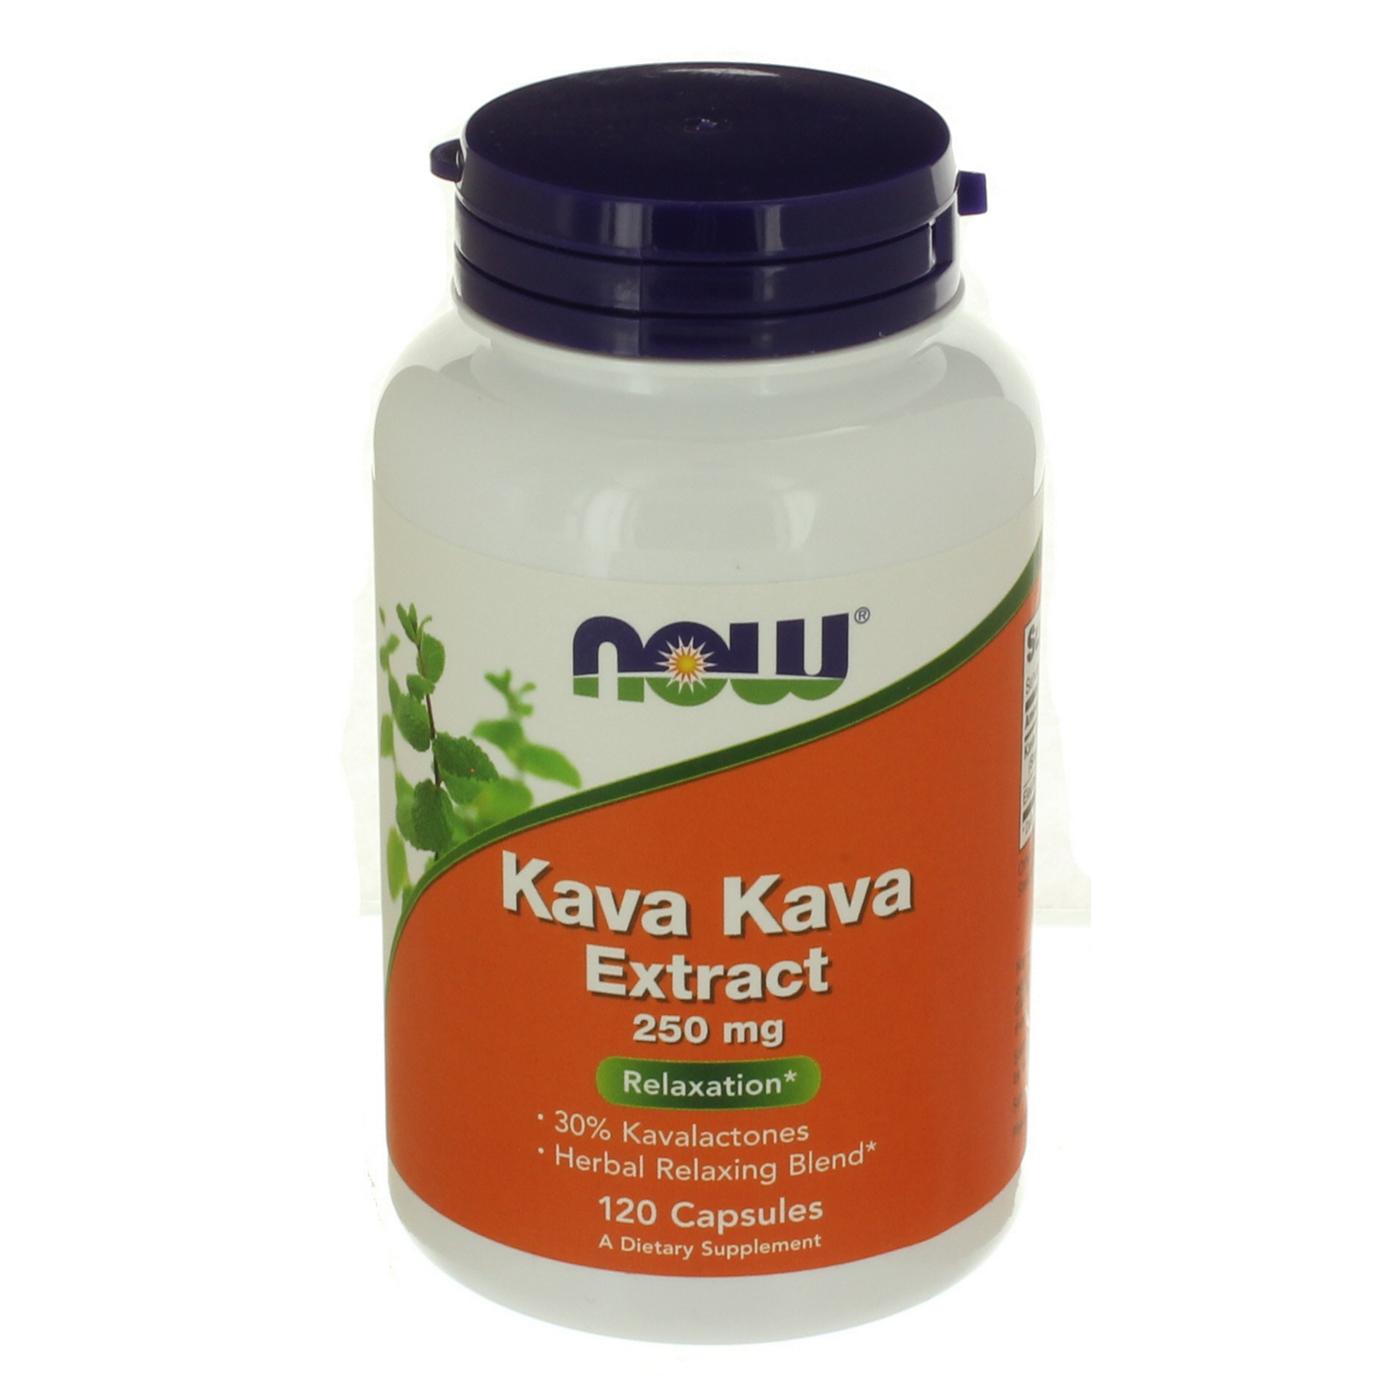 NOW Kava Kava Extract 250 mg Capsules; image 1 of 2